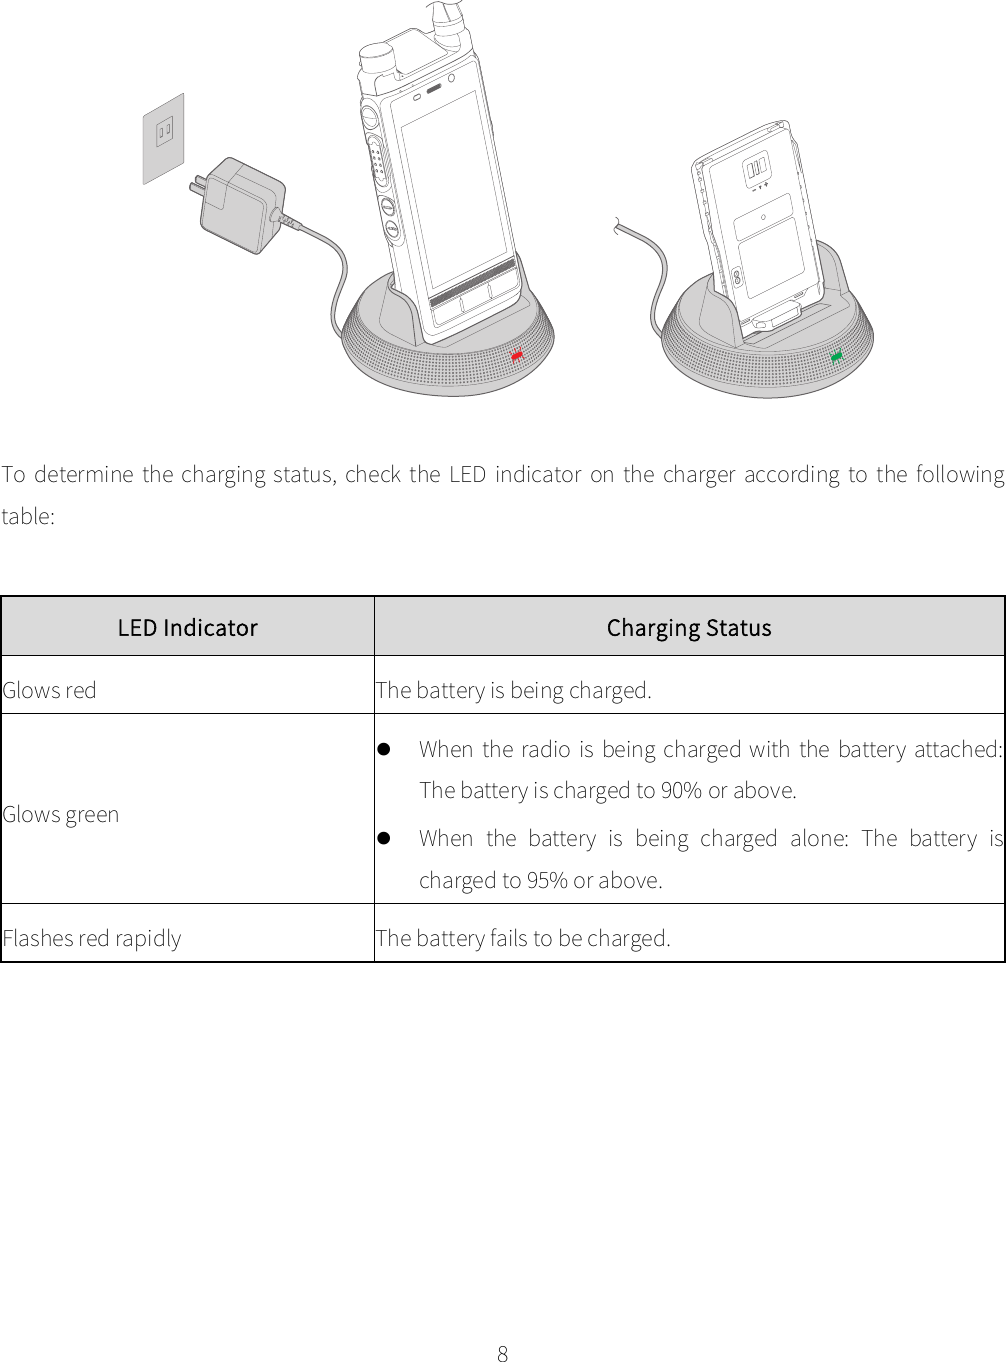    8  To  determine  the  charging  status,  check  the LED  indicator  on  the  charger  according  to  the following table:  LED Indicator Charging Status Glows red The battery is being charged. Glows green  When the  radio is  being charged  with the  battery attached: The battery is charged to 90% or above.  When the  battery is  being  charged alone:  The  battery is charged to 95% or above. Flashes red rapidly The battery fails to be charged. 